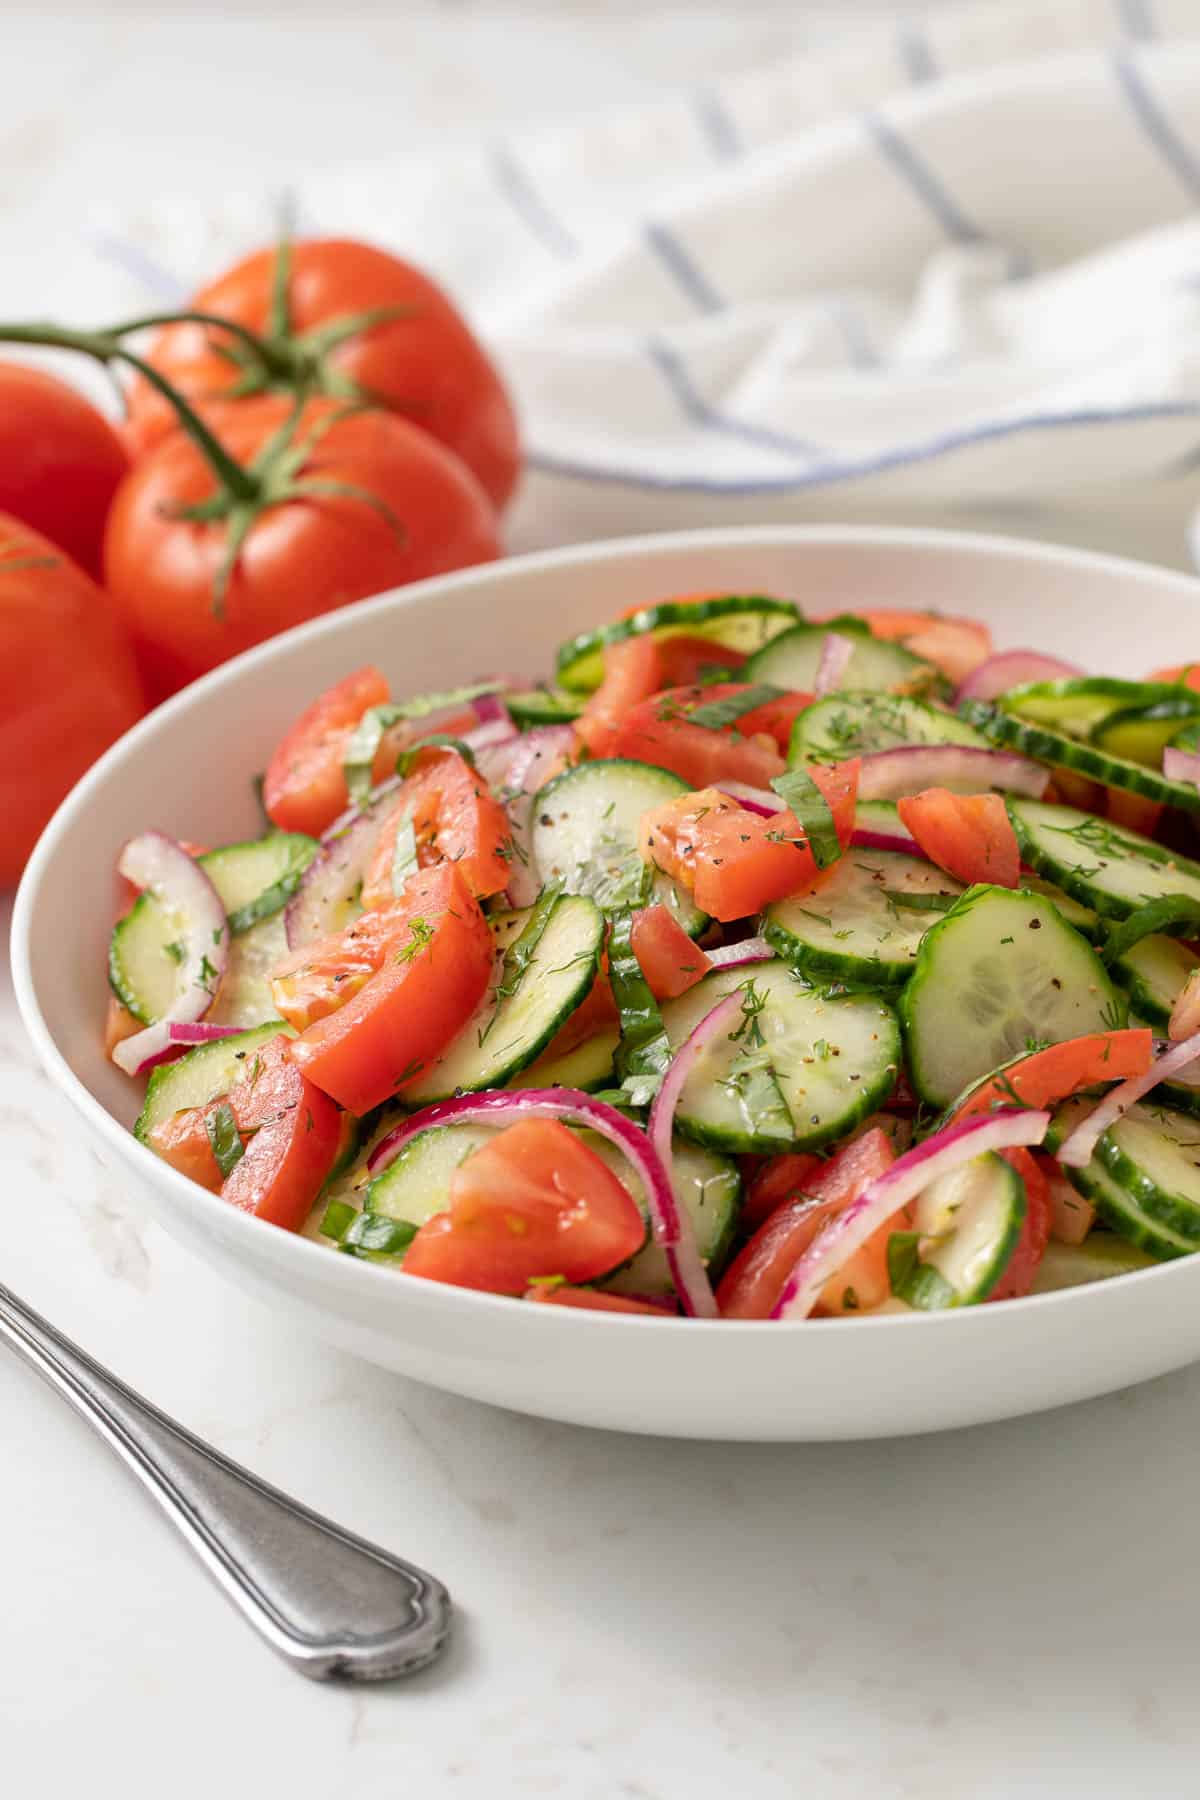 Front view of a bowl of tomato cucumber salad.